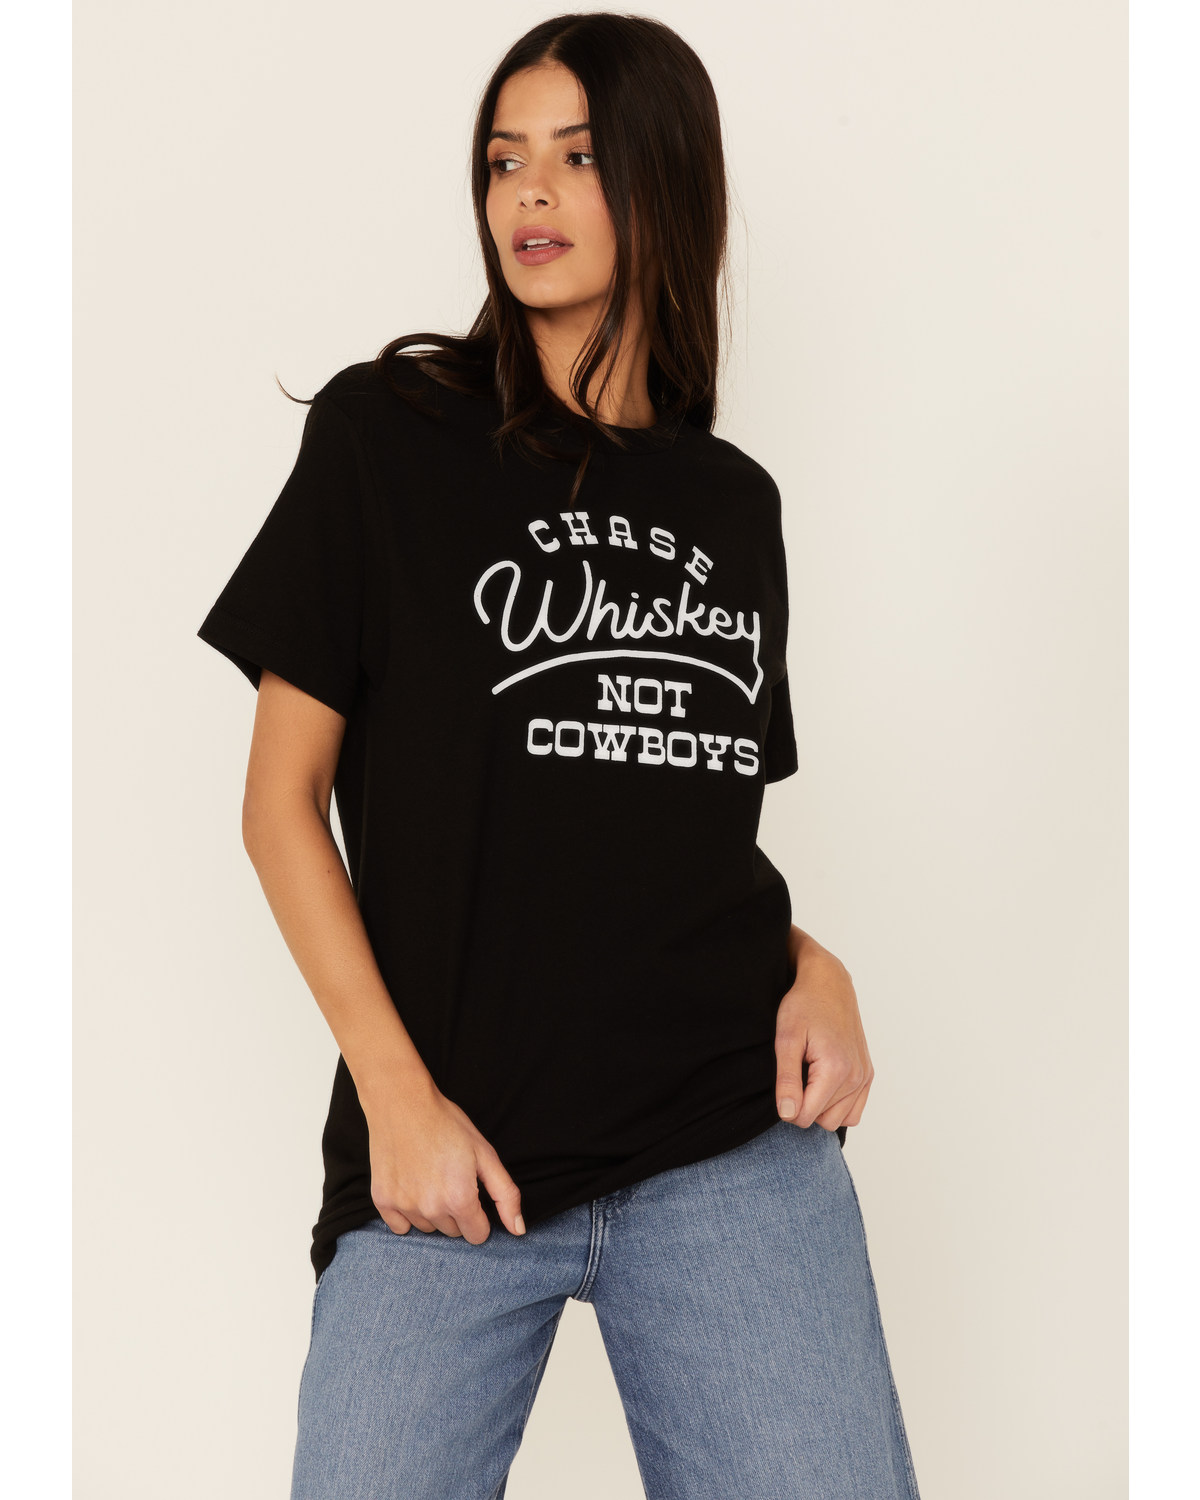 Ali Dee Women's Chase Whiskey Not Cowboys Graphic Tee